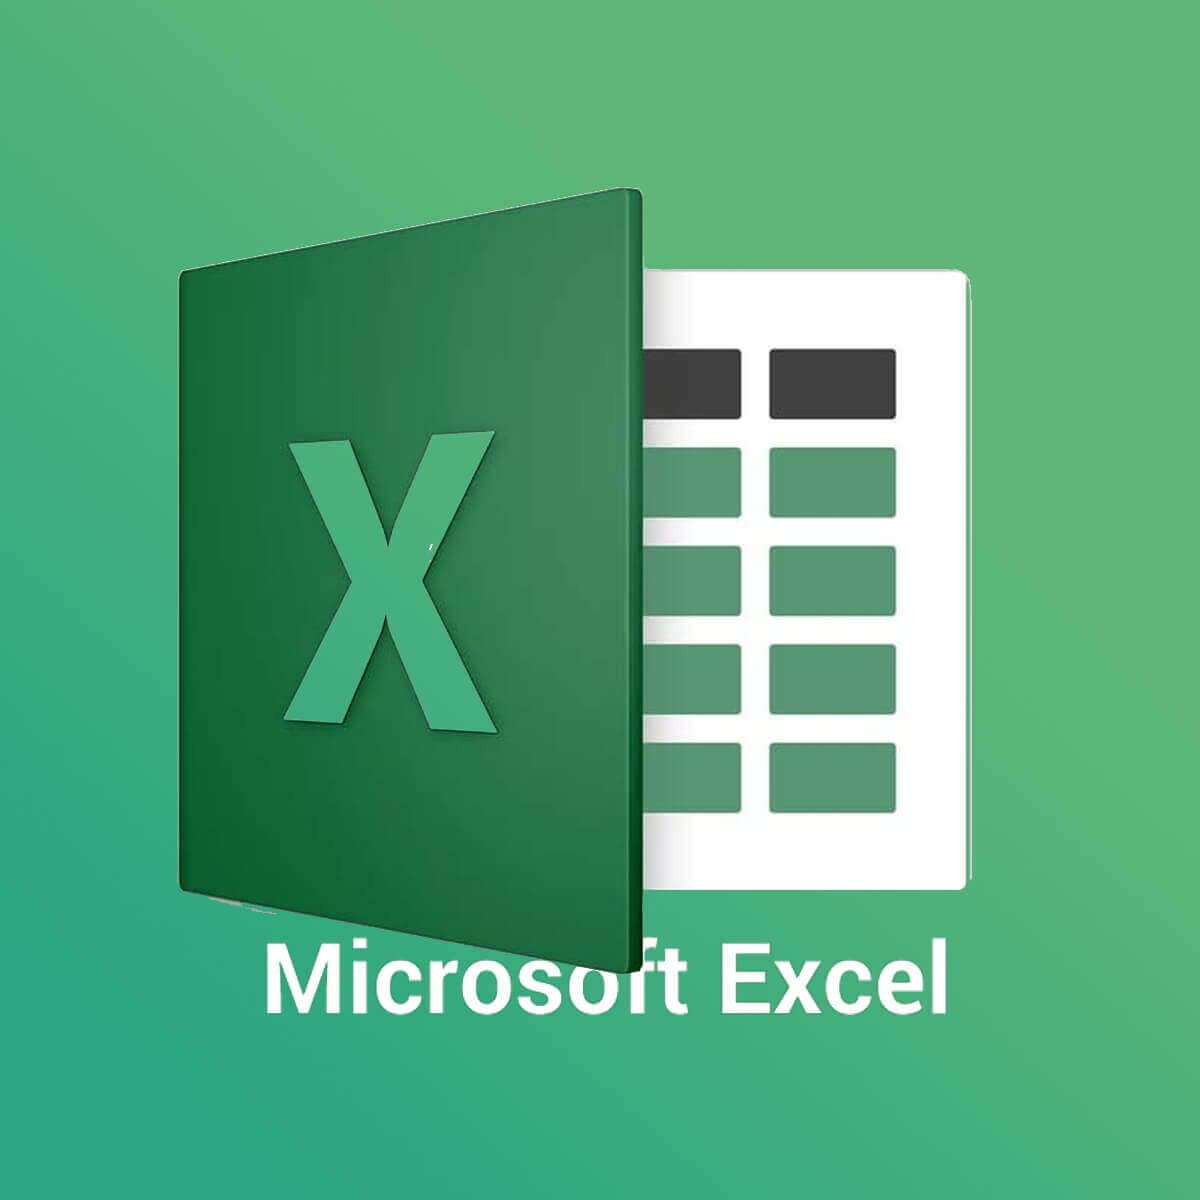 Microsoft Excel sum doesn't add correctly